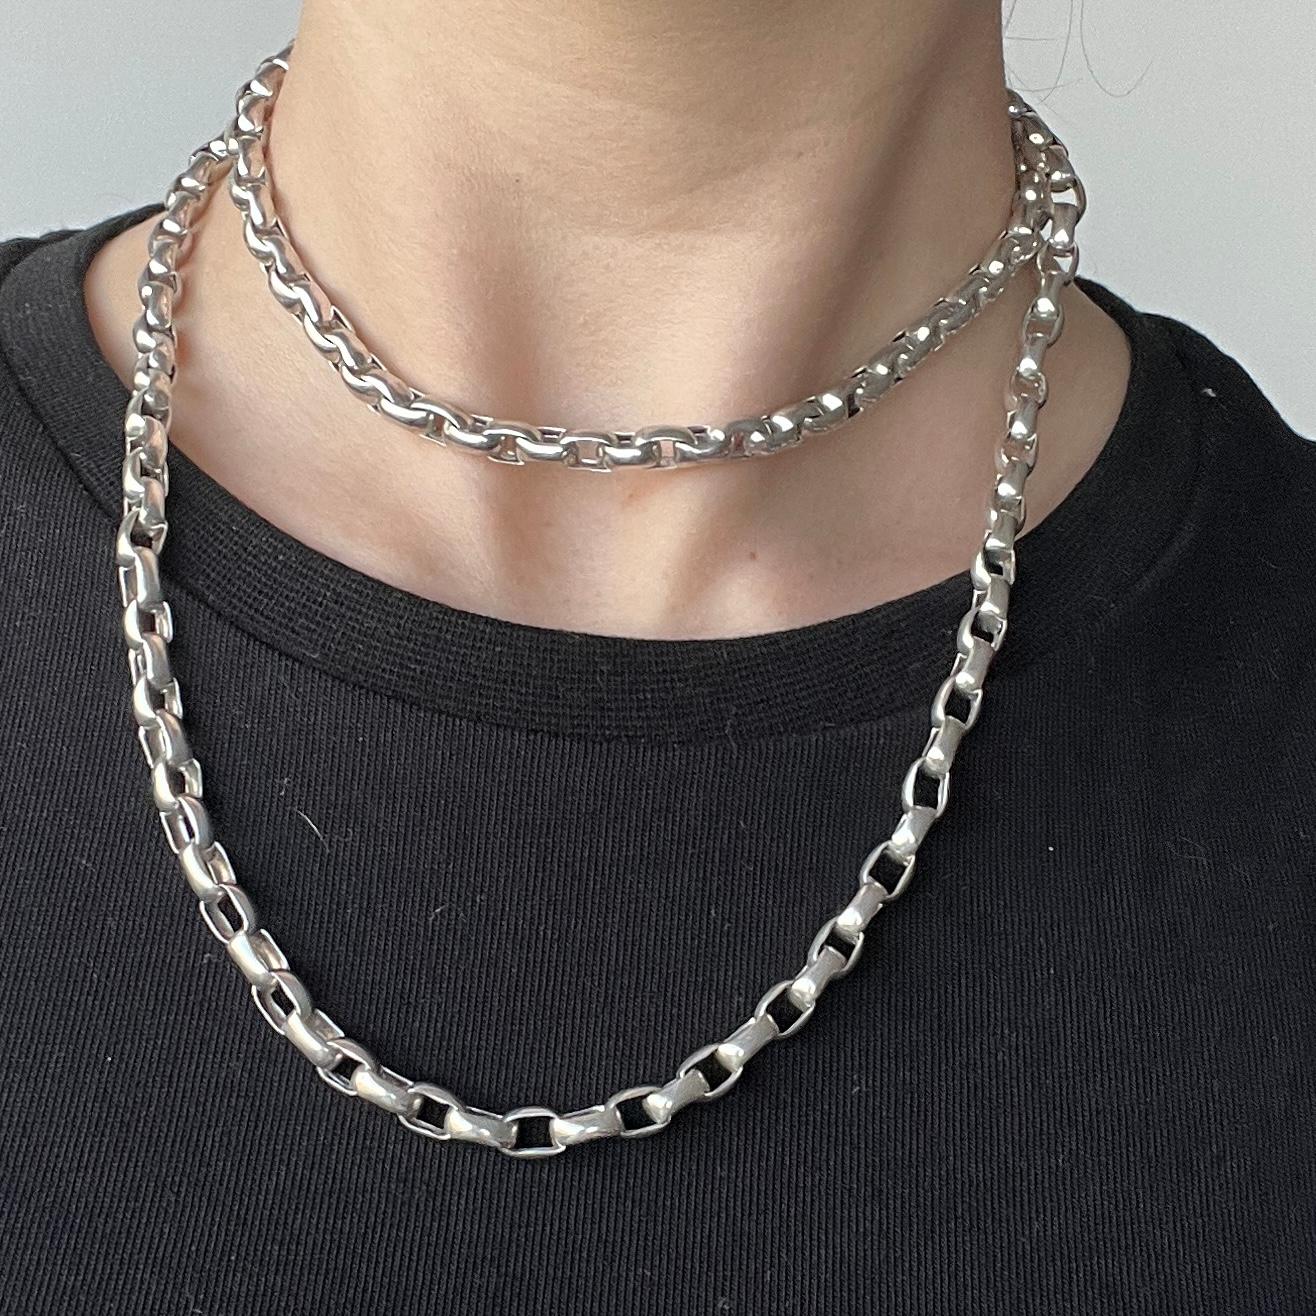 Gorgeous glossy silver longuard necklace. Very versatile and classic!

Length: 85.5cm
Chain Width: 5.5mm

Weight: 47.9g